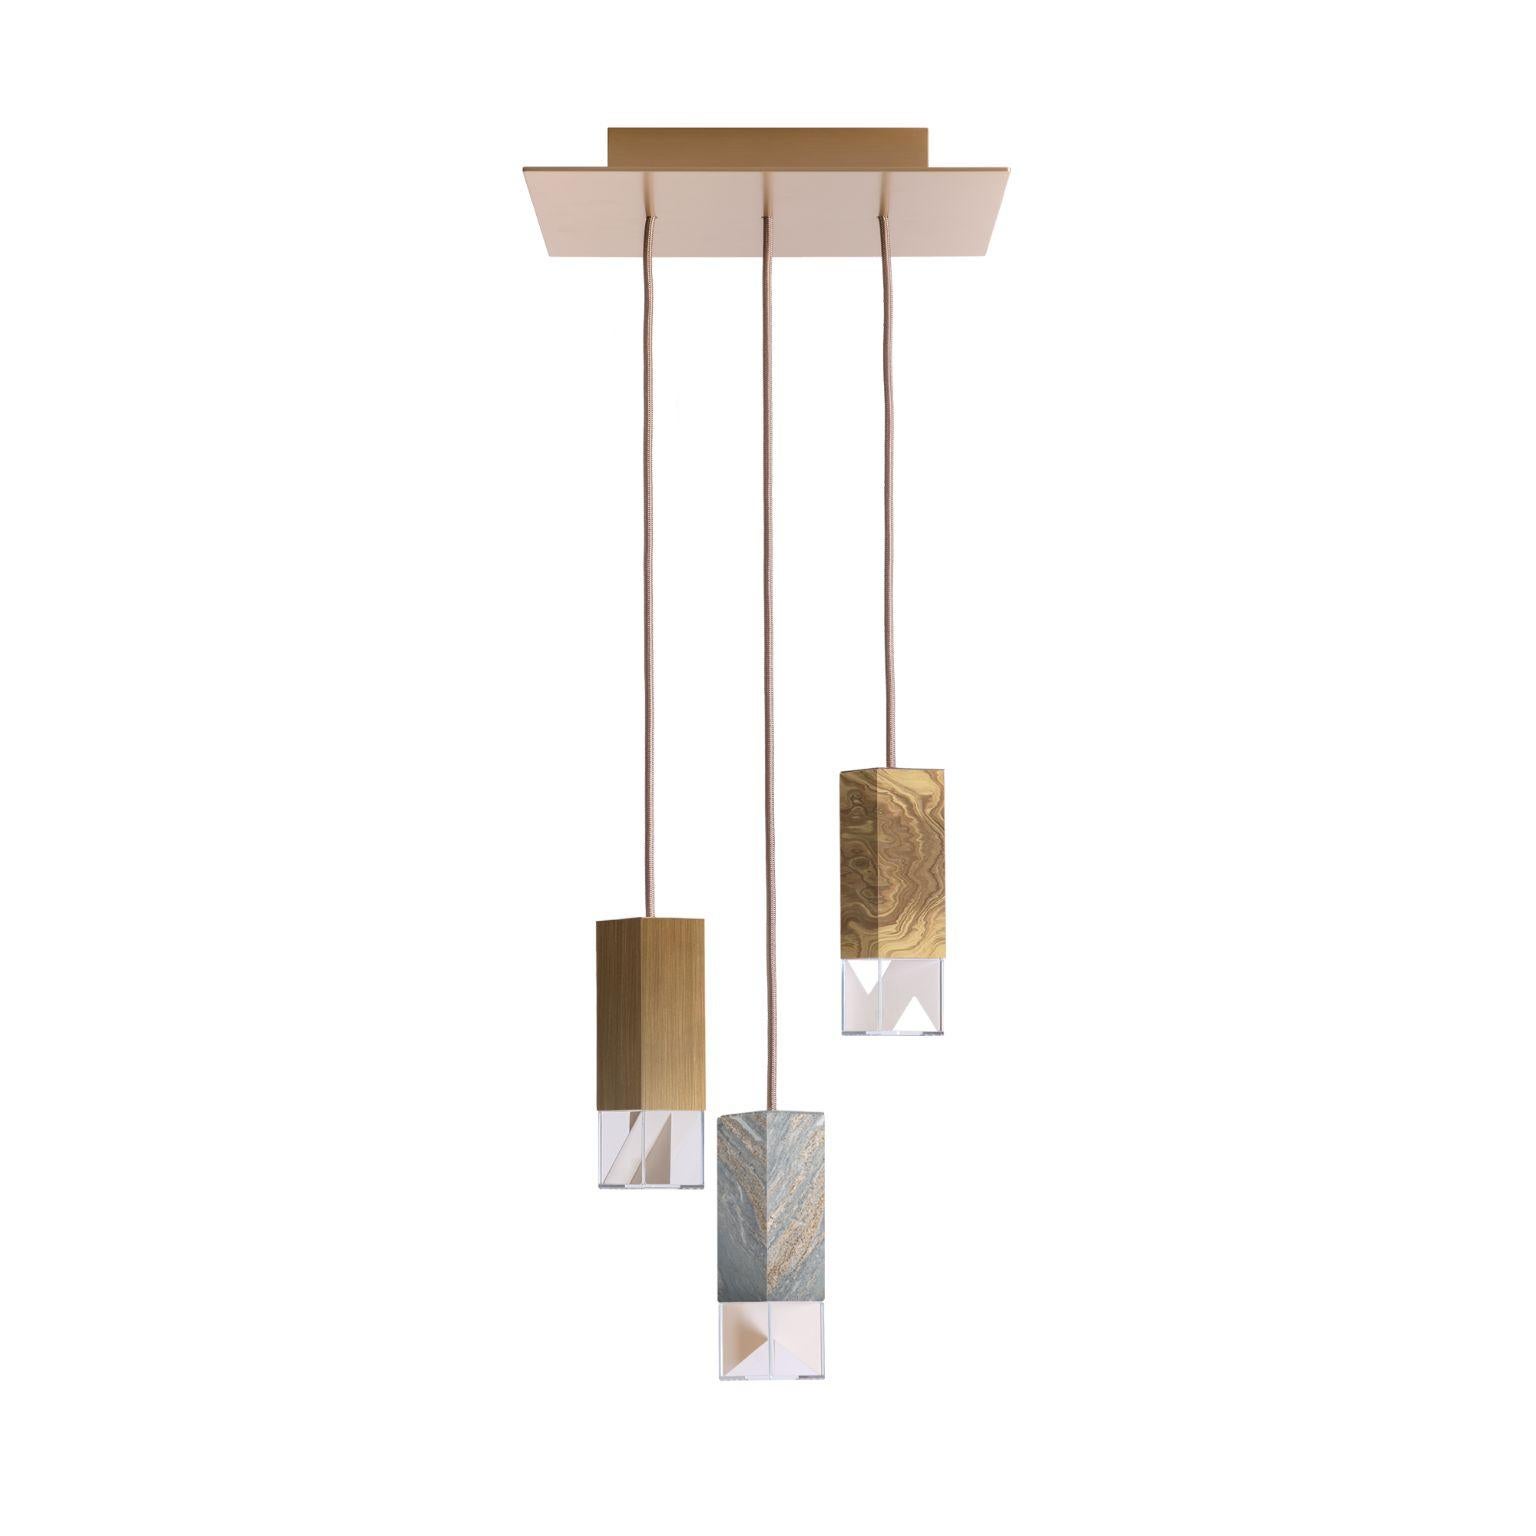 Lamp one Collection chandelier 01 by Formaminima
Dimensions: D 30 x W 30 x H 68 cm (adjustable height, please contact us.)
Materials: Body lamps: handcrafted solid Palissandro Blu Nuvolato, polished
finish; solid burnished brass matt satin